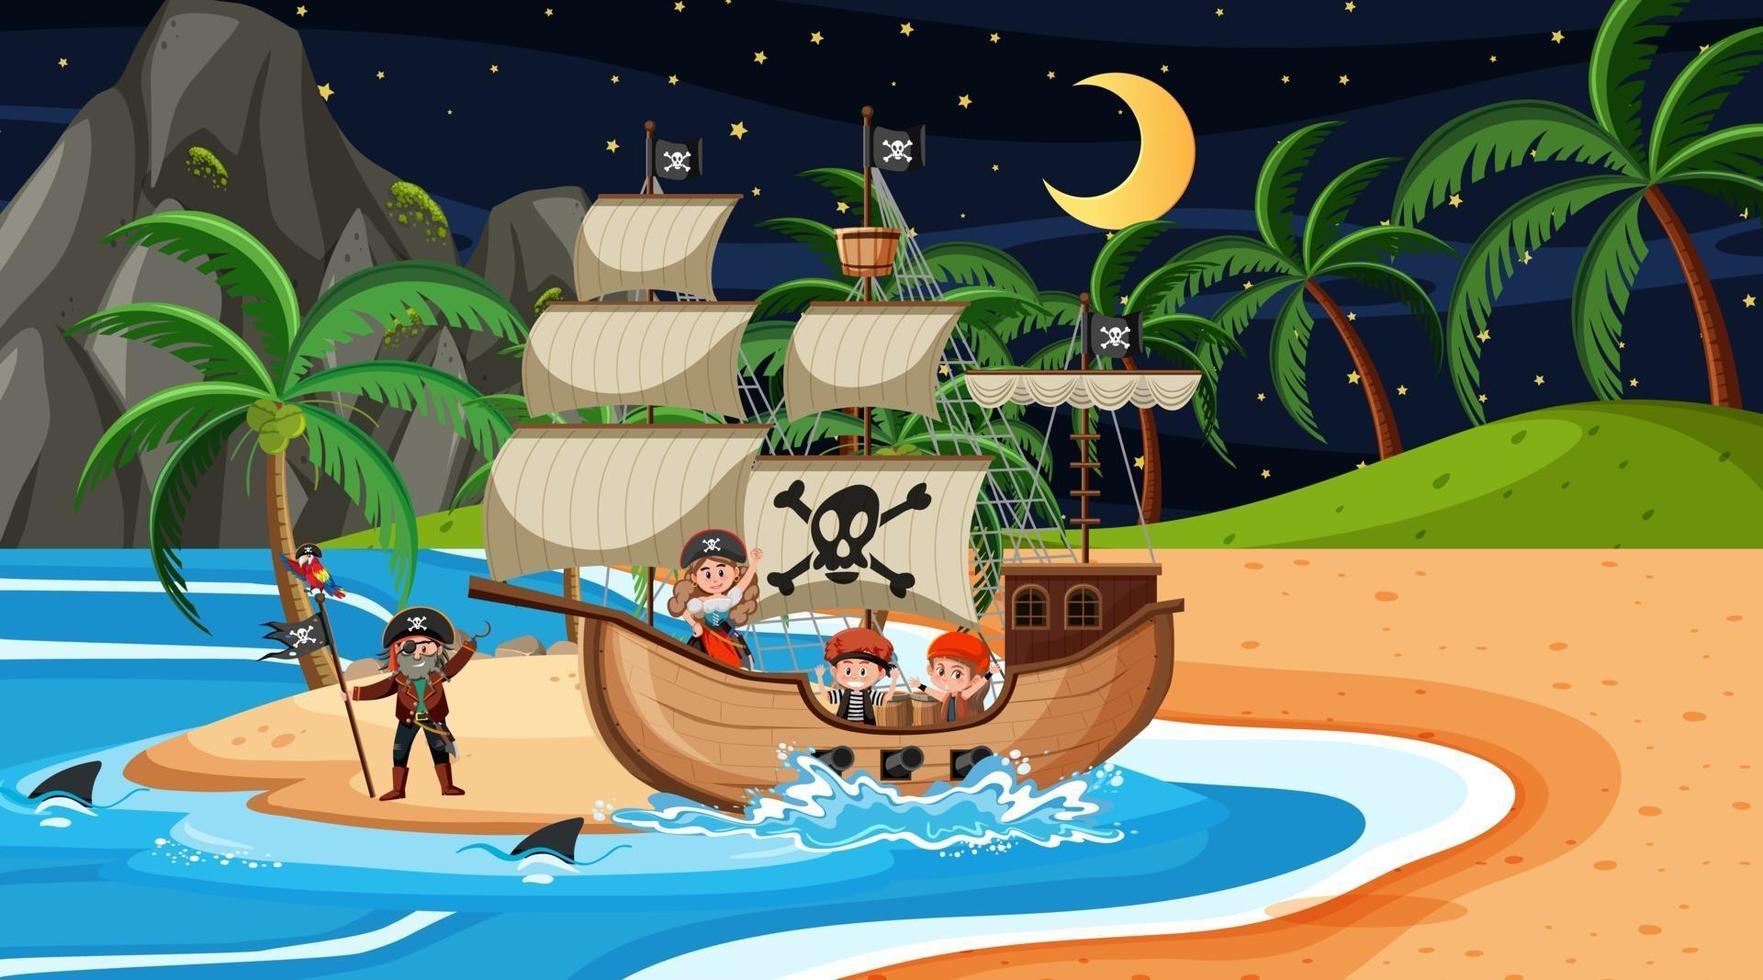 Beach with Pirate ship at night scene in cartoon style vector